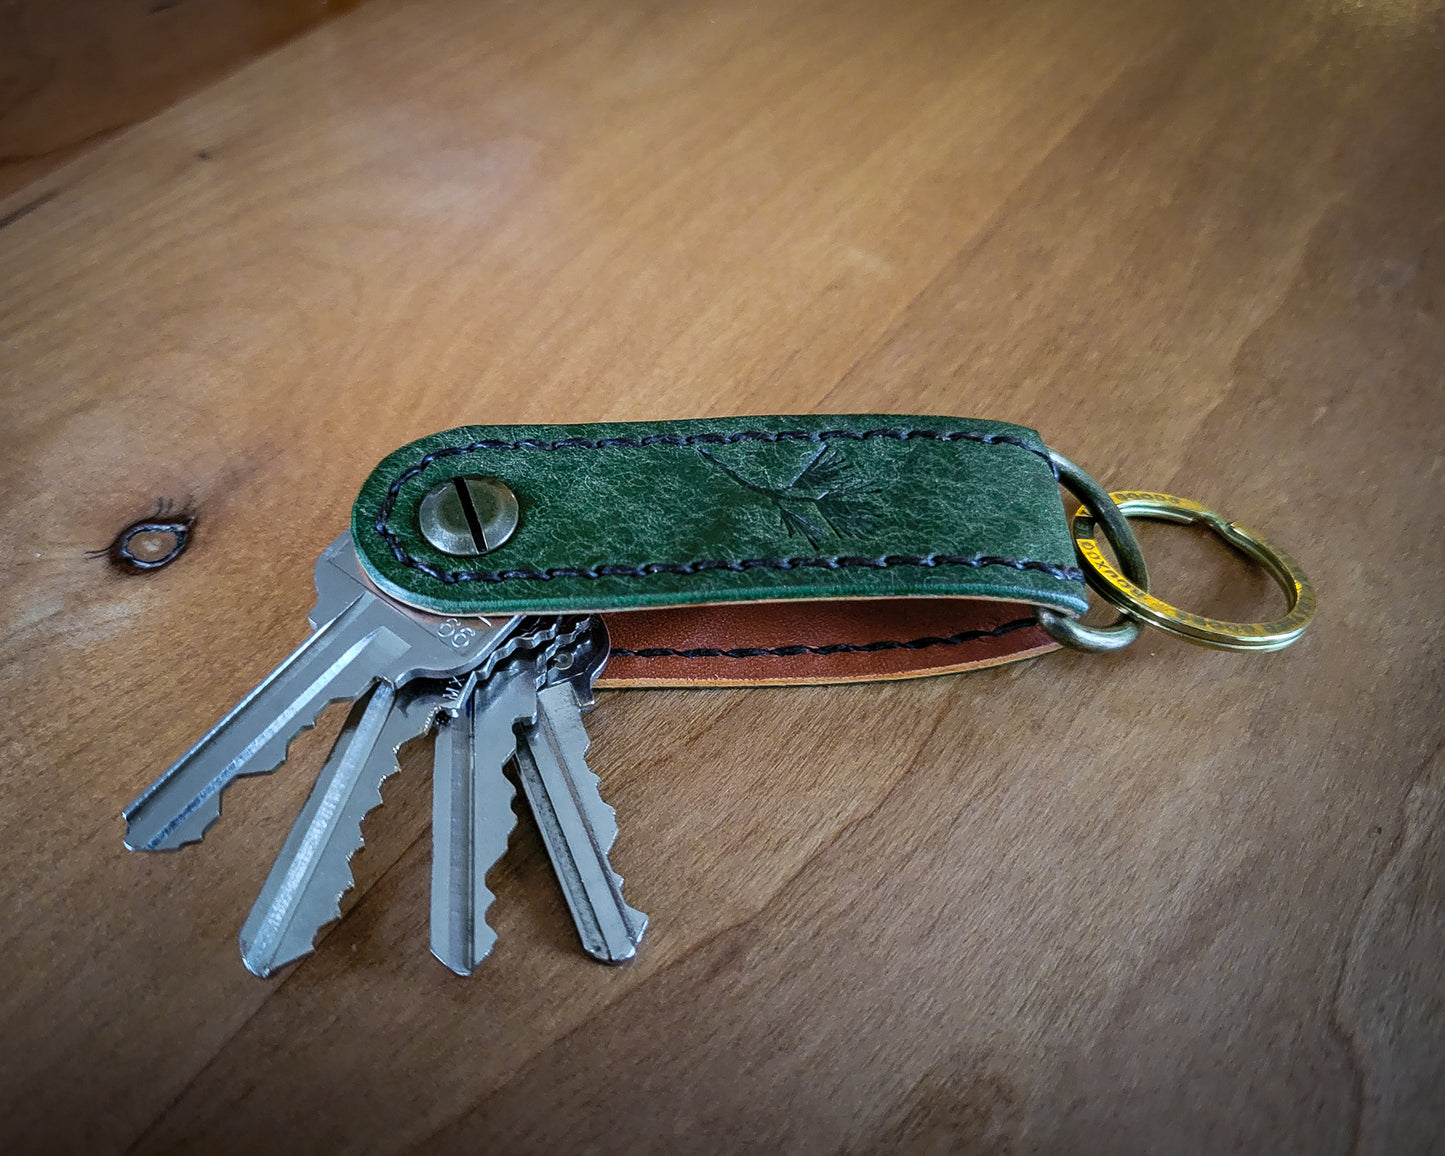 Green Leather EDC Key Organizer stitched with brown thread holding 4 keys. Laying open on wood table. 